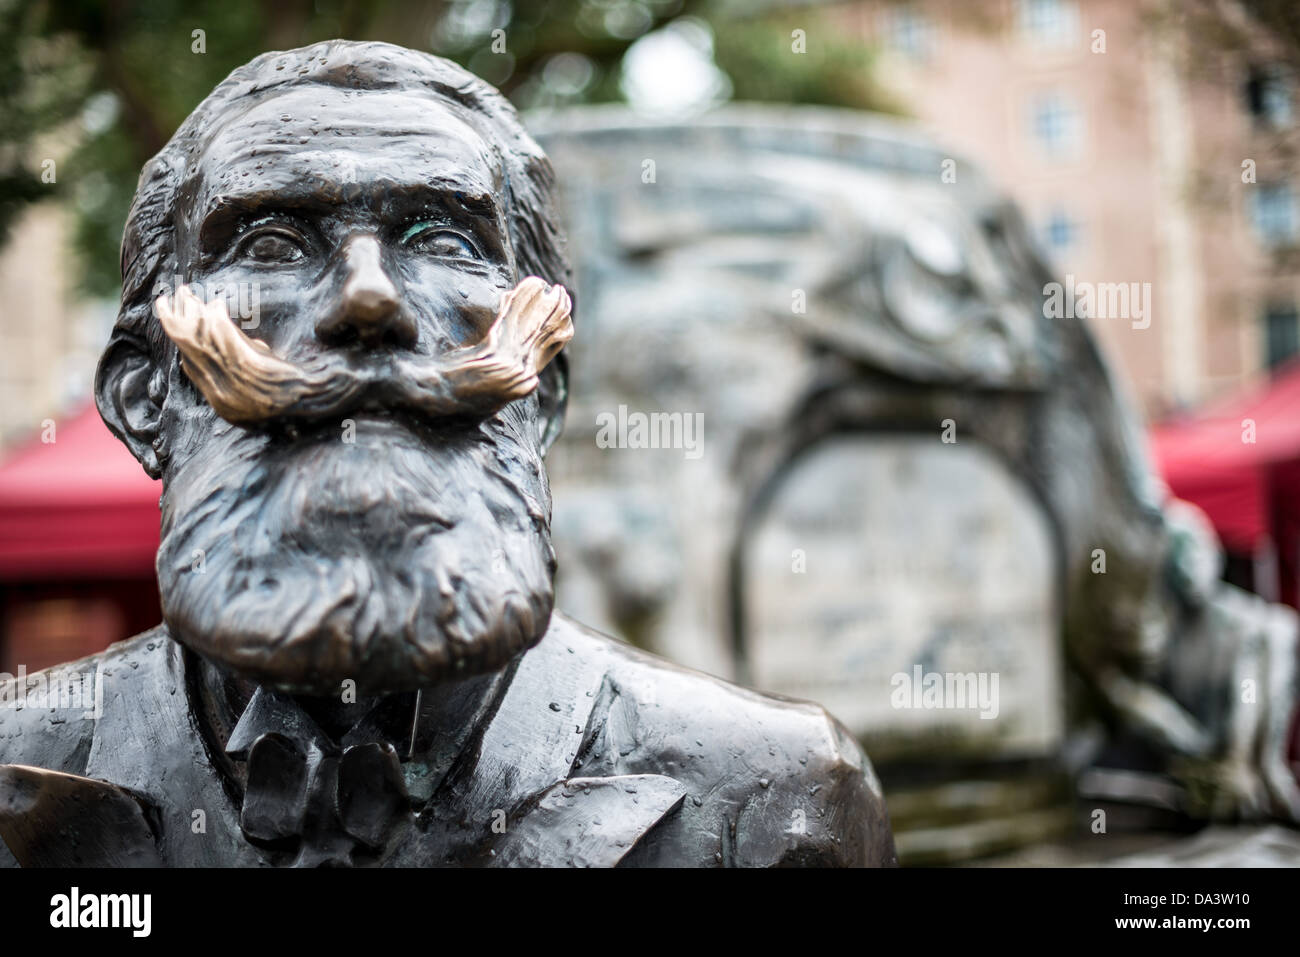 BRUSSELS, Belgium - A statue of Karel Buls (Charles Buls), a former mayor of the City of Brussels (from 1881 to 1899). The statue sits in Grasmarkt/Rue du Marché aux Herbes-Agora Square in the city's Lower Town. Stock Photo